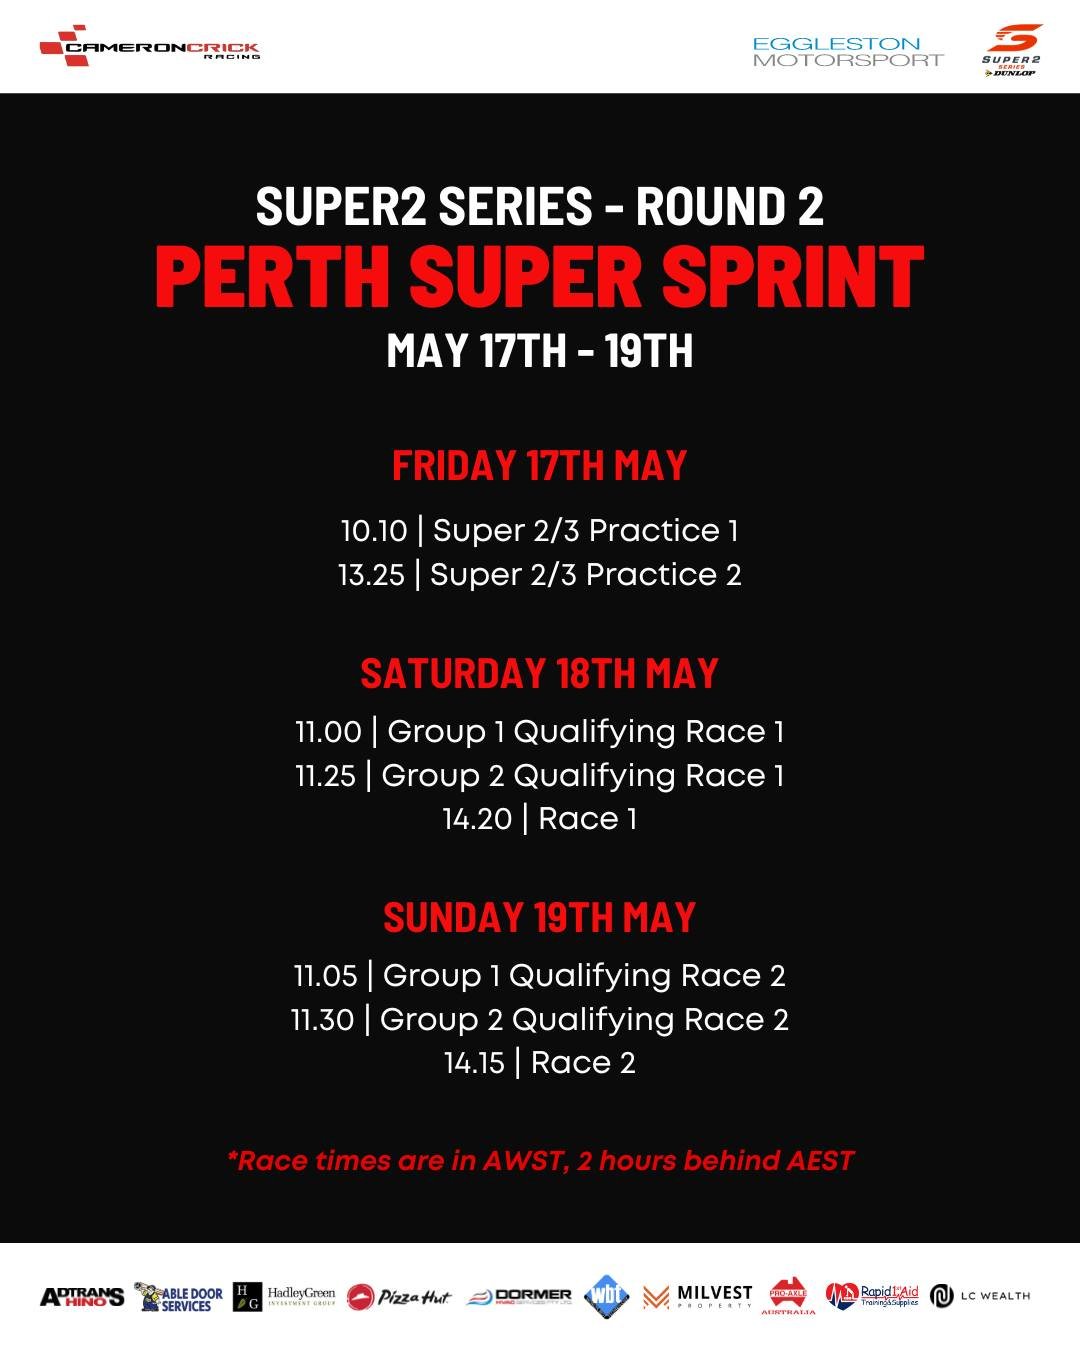 Track schedule for round 2 of the Super 2 Series this weekend over in Perth 👊🏼🏁
Remember, Race times are 2 hours behind Sydney!